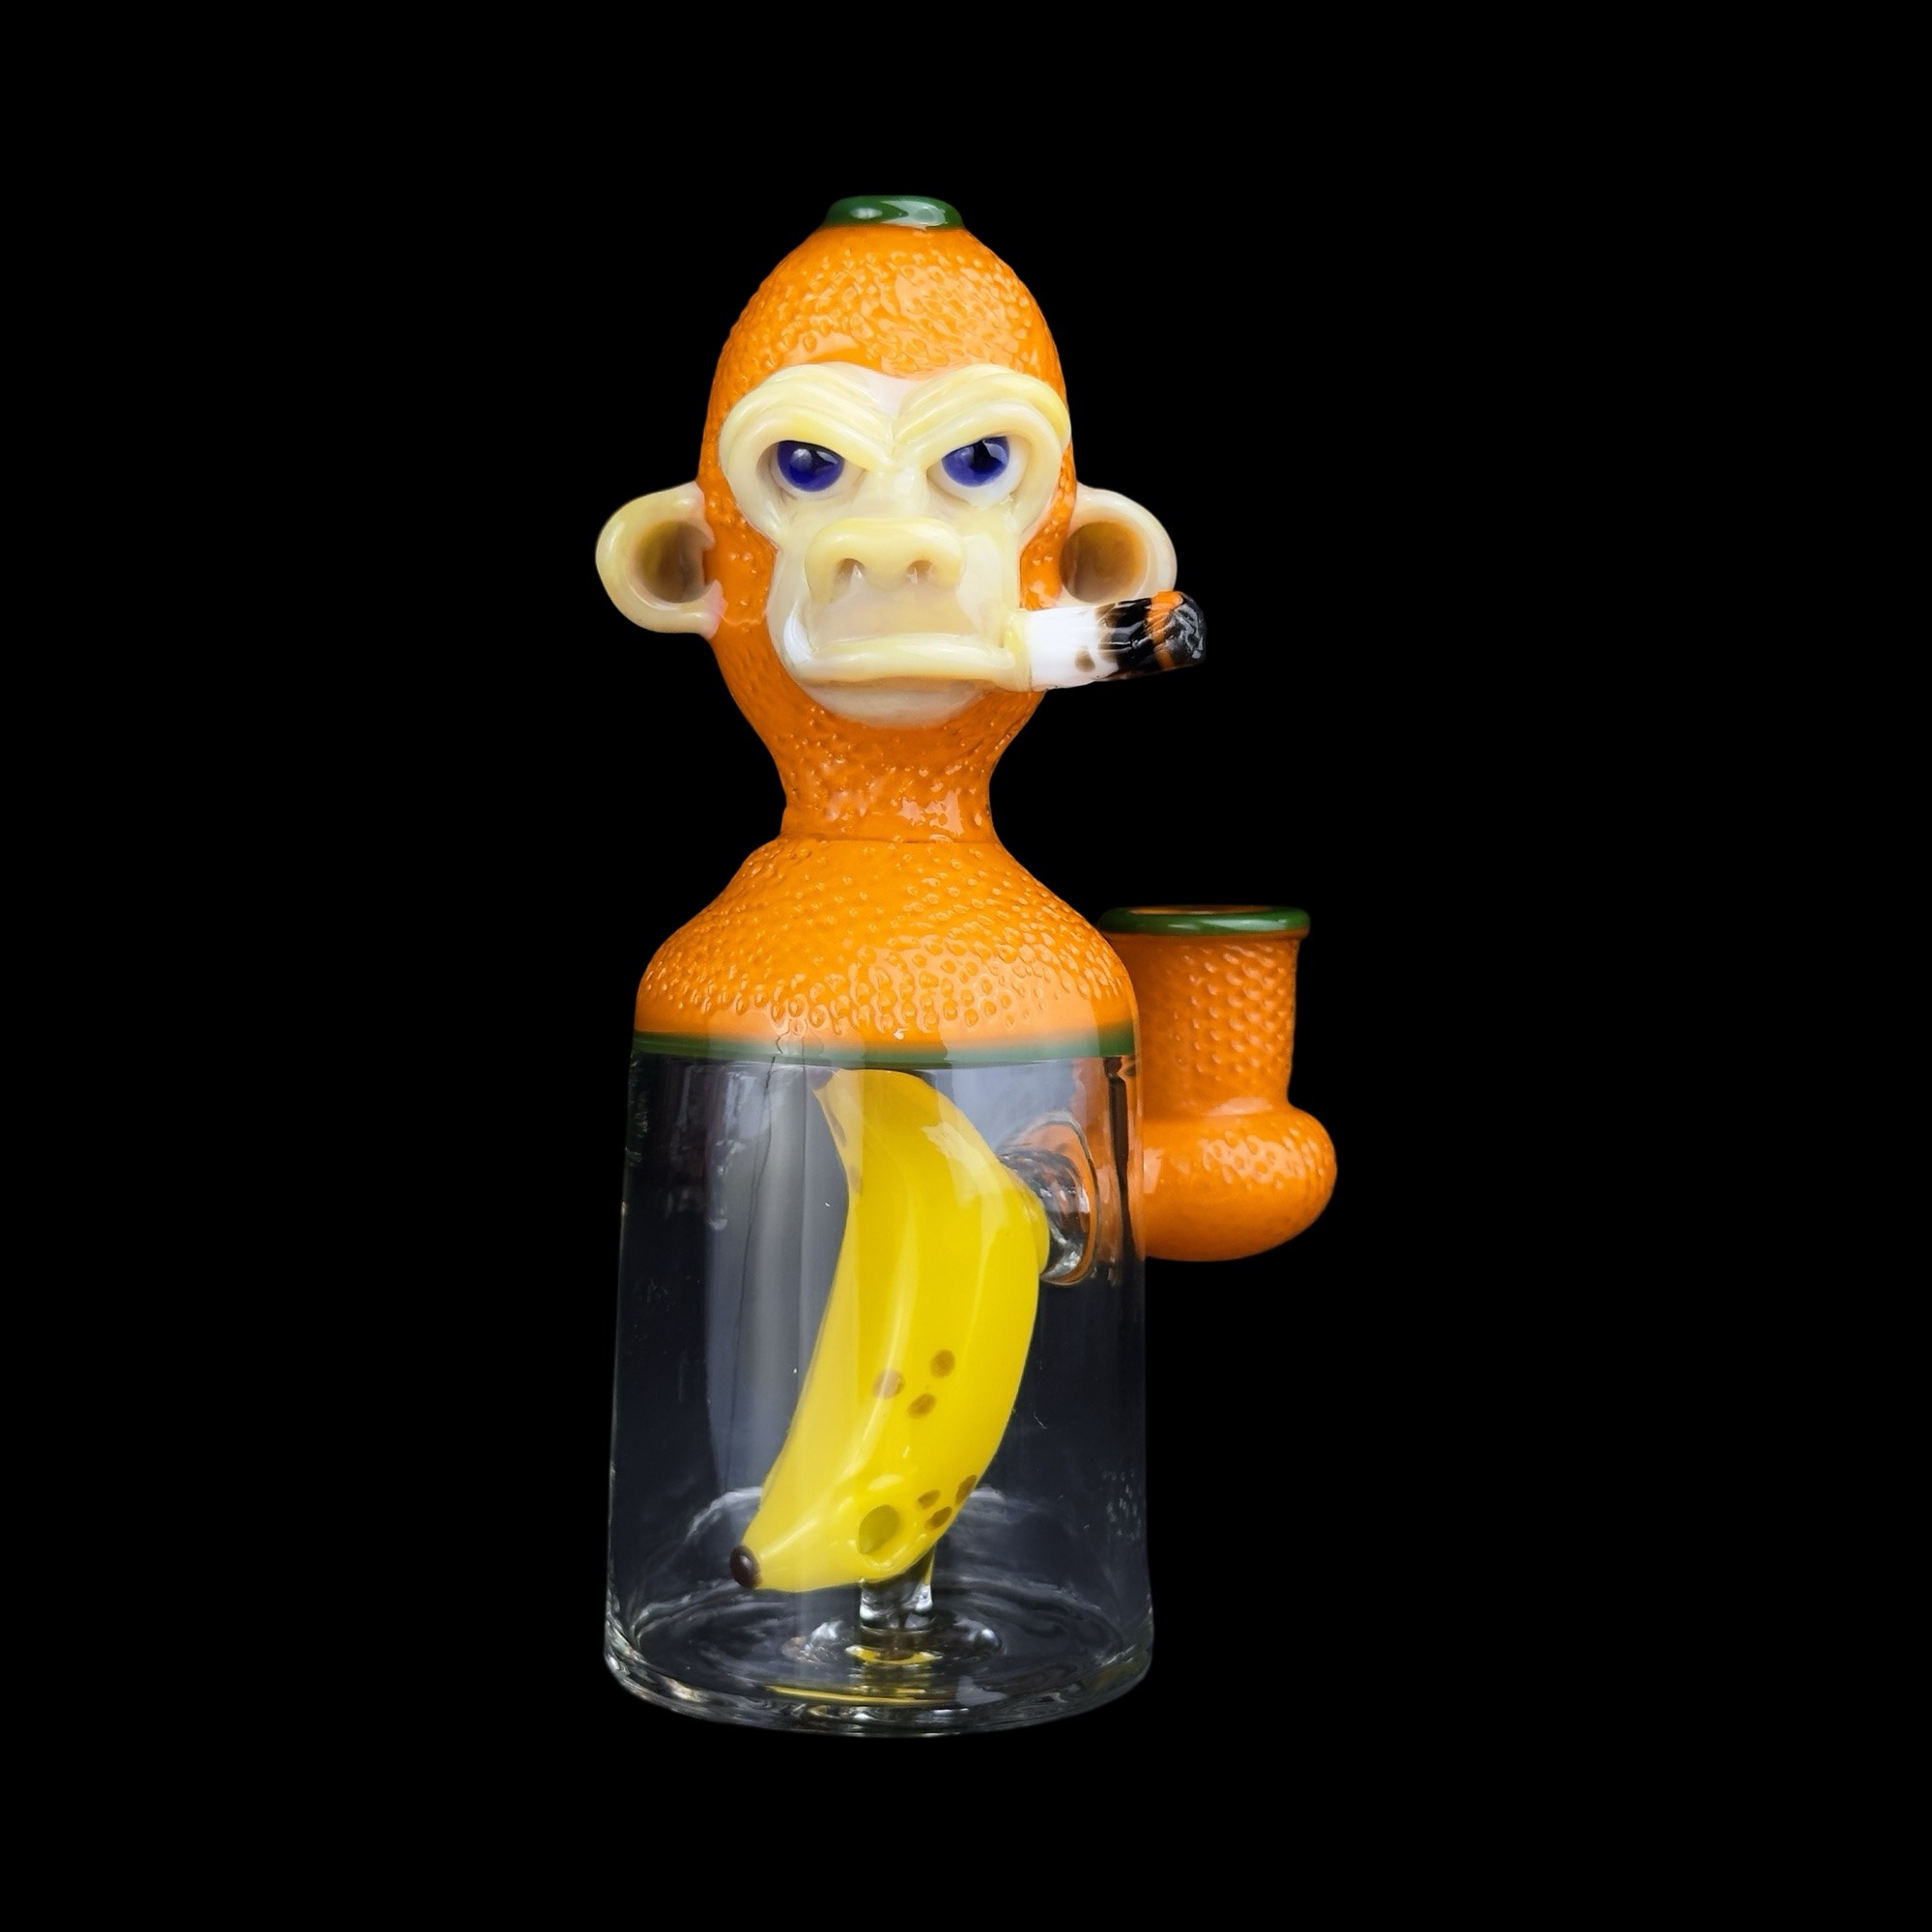 Smoke Chimp Orange Edition 6.5" Rig By The Glass Fish (Complete Set) 01 | Monkey Paw Mexico